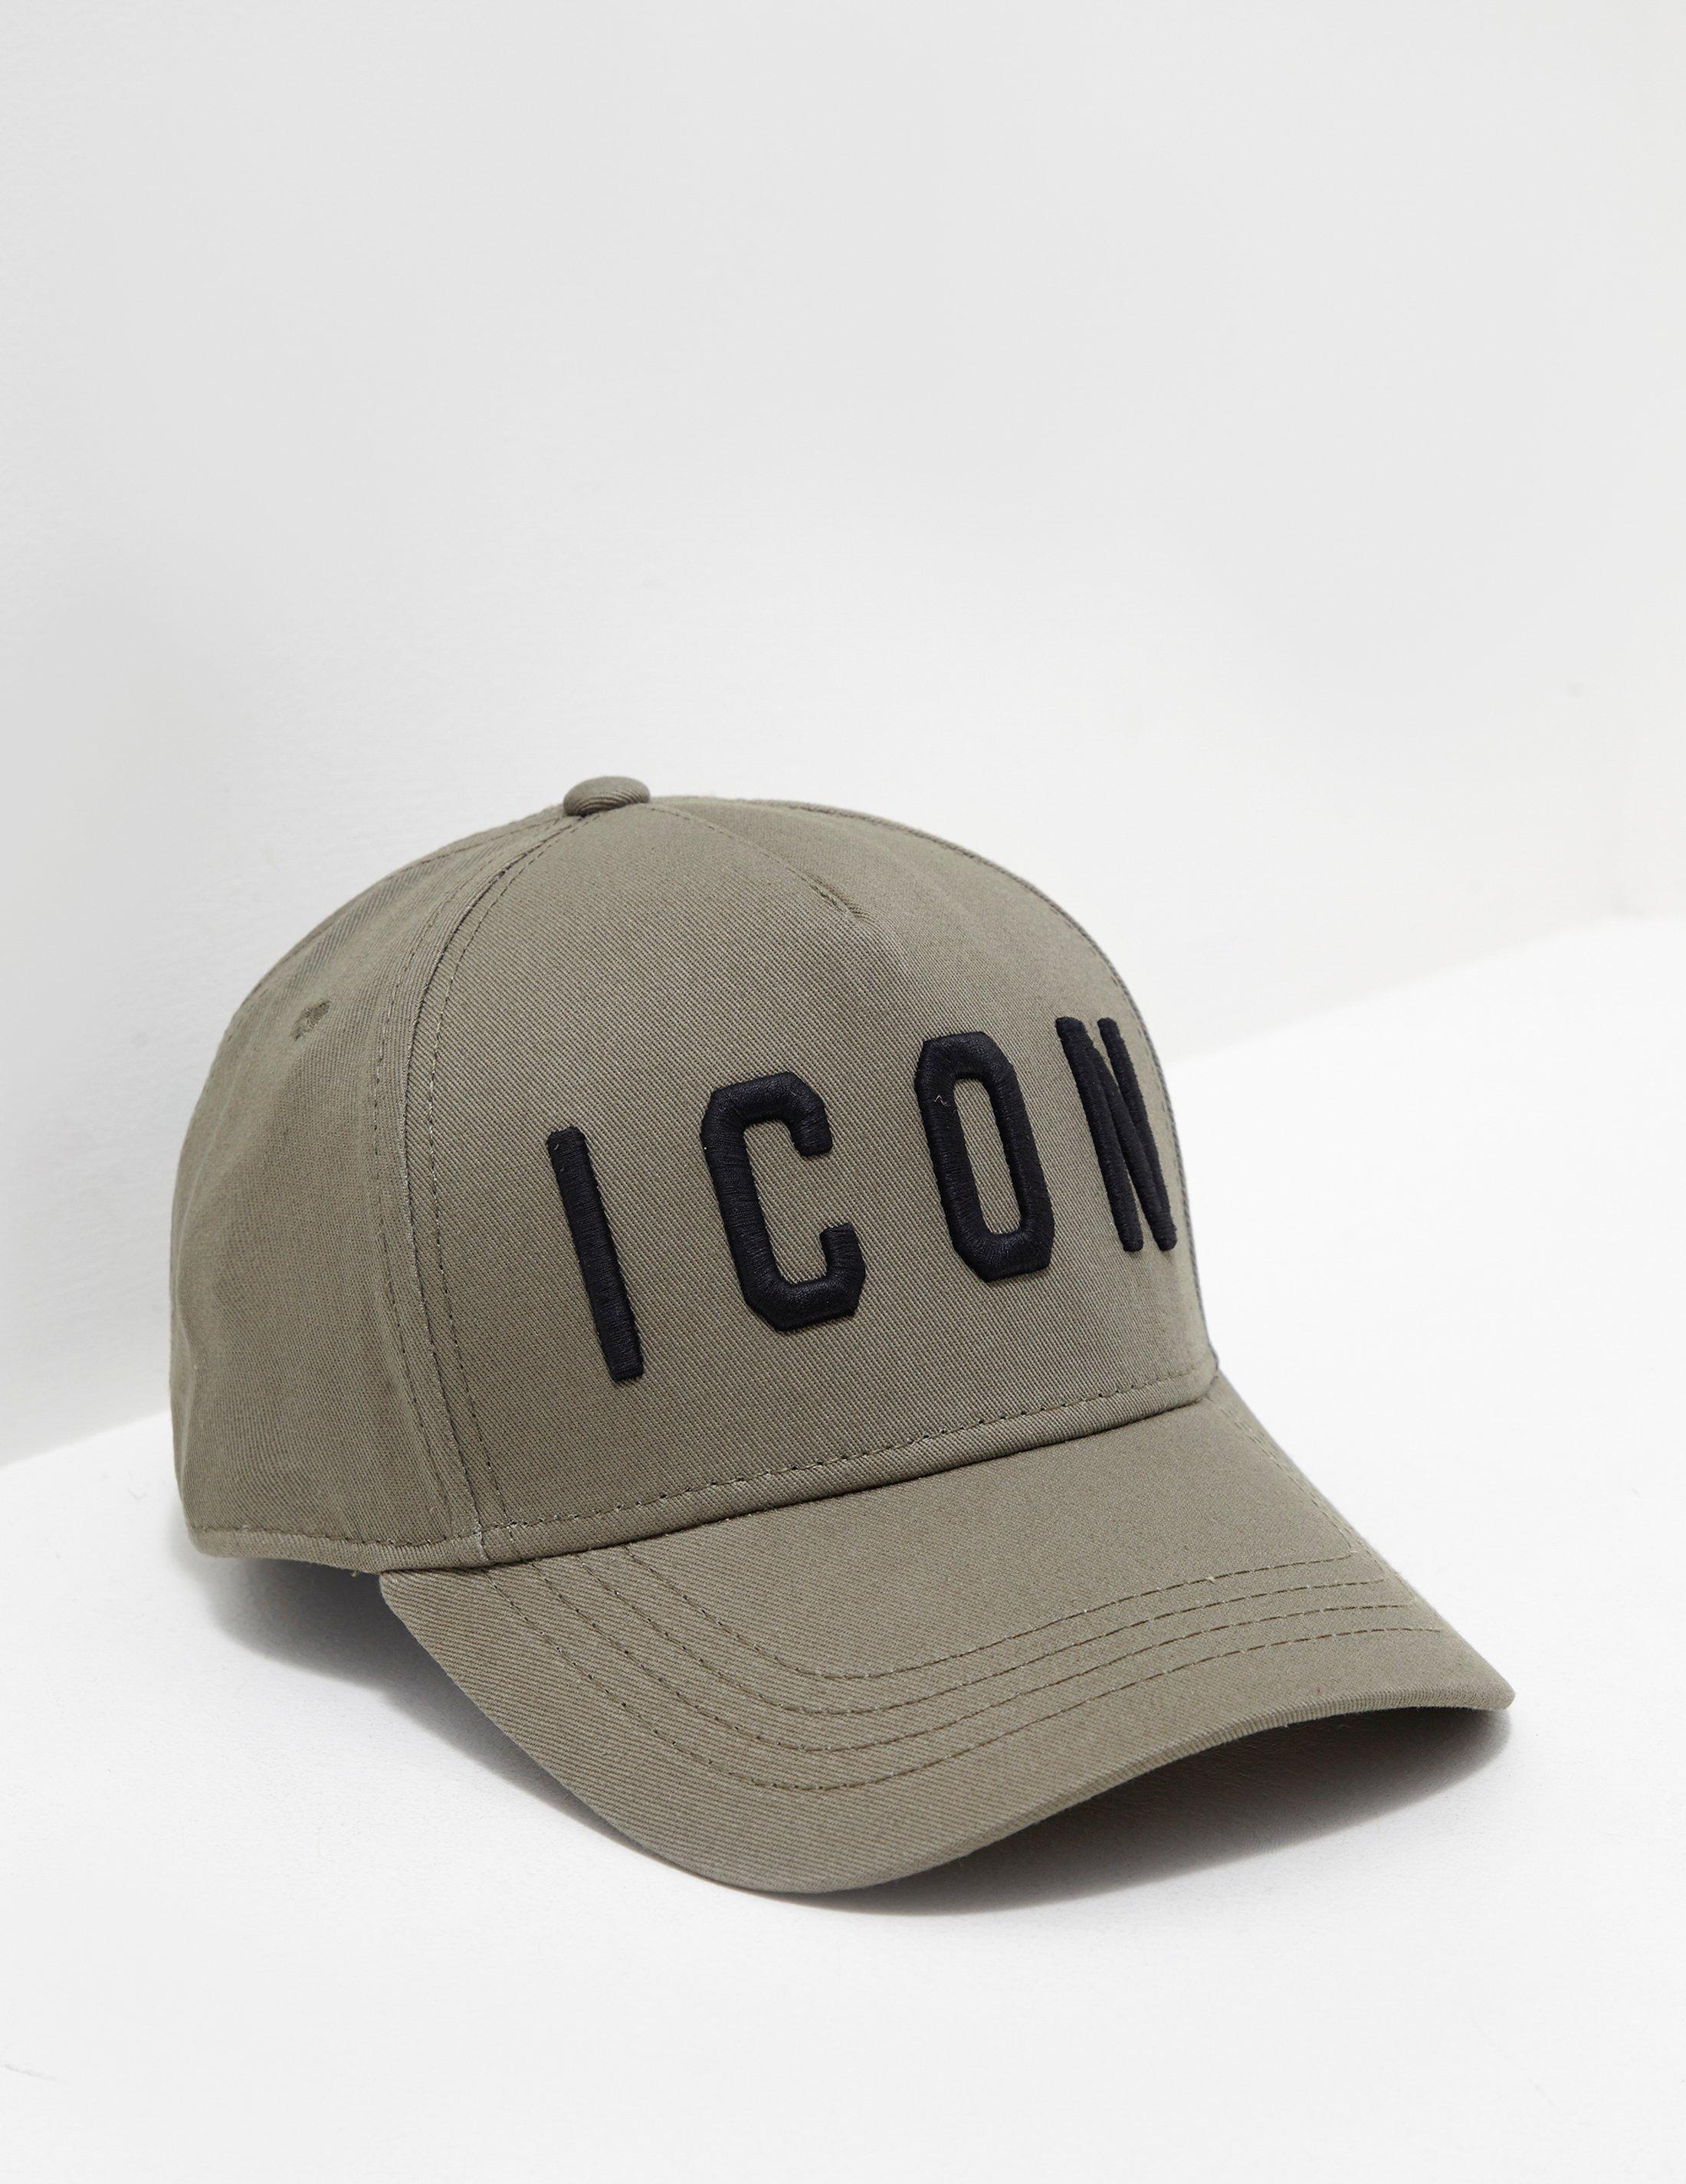 dsquared cap military green